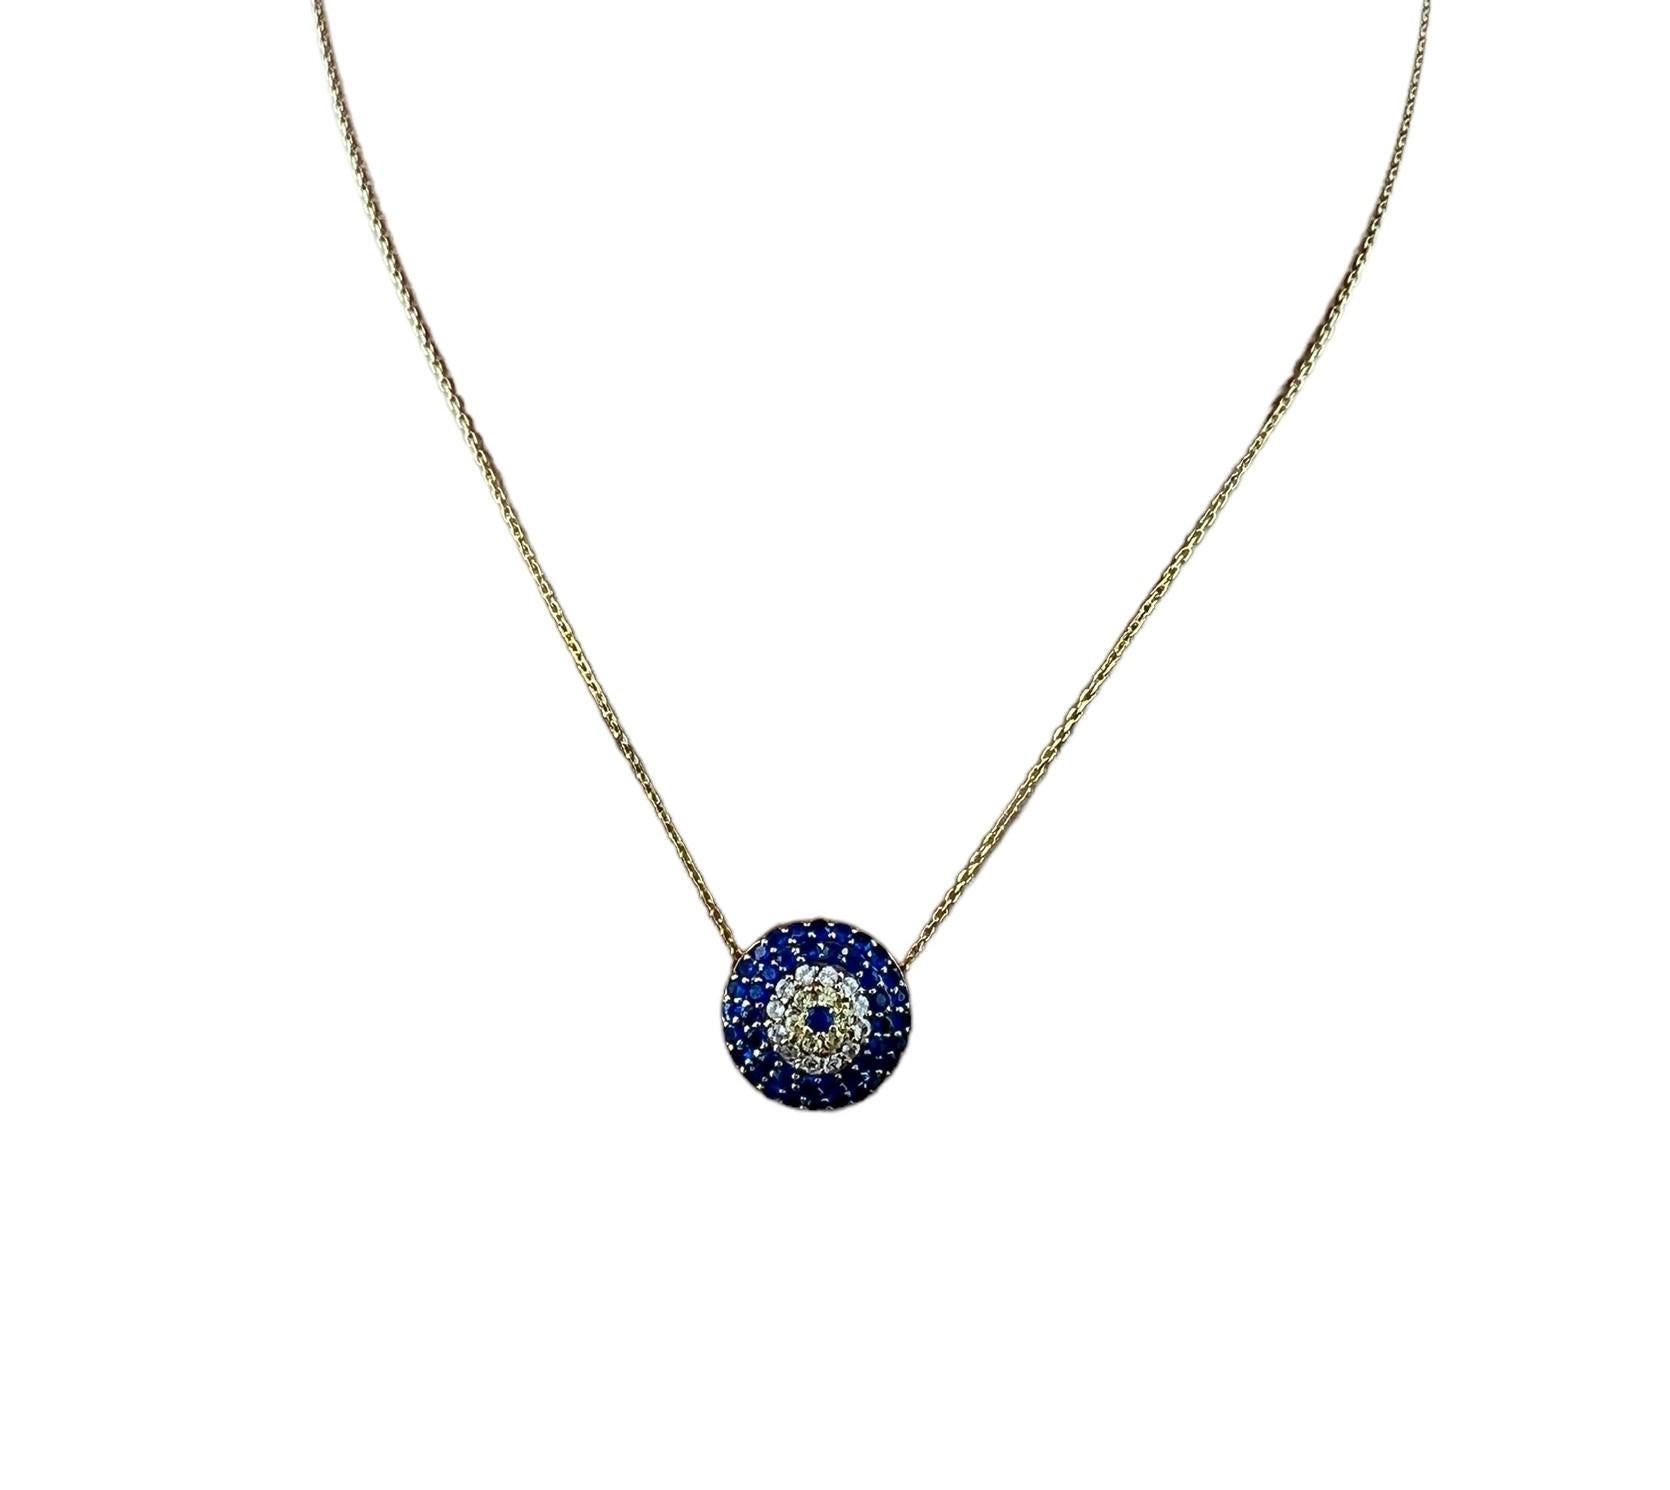 Women's 14K Yellow Gold Faceted Blue White Yellow Glass Stone Pendant Necklace #15627 For Sale